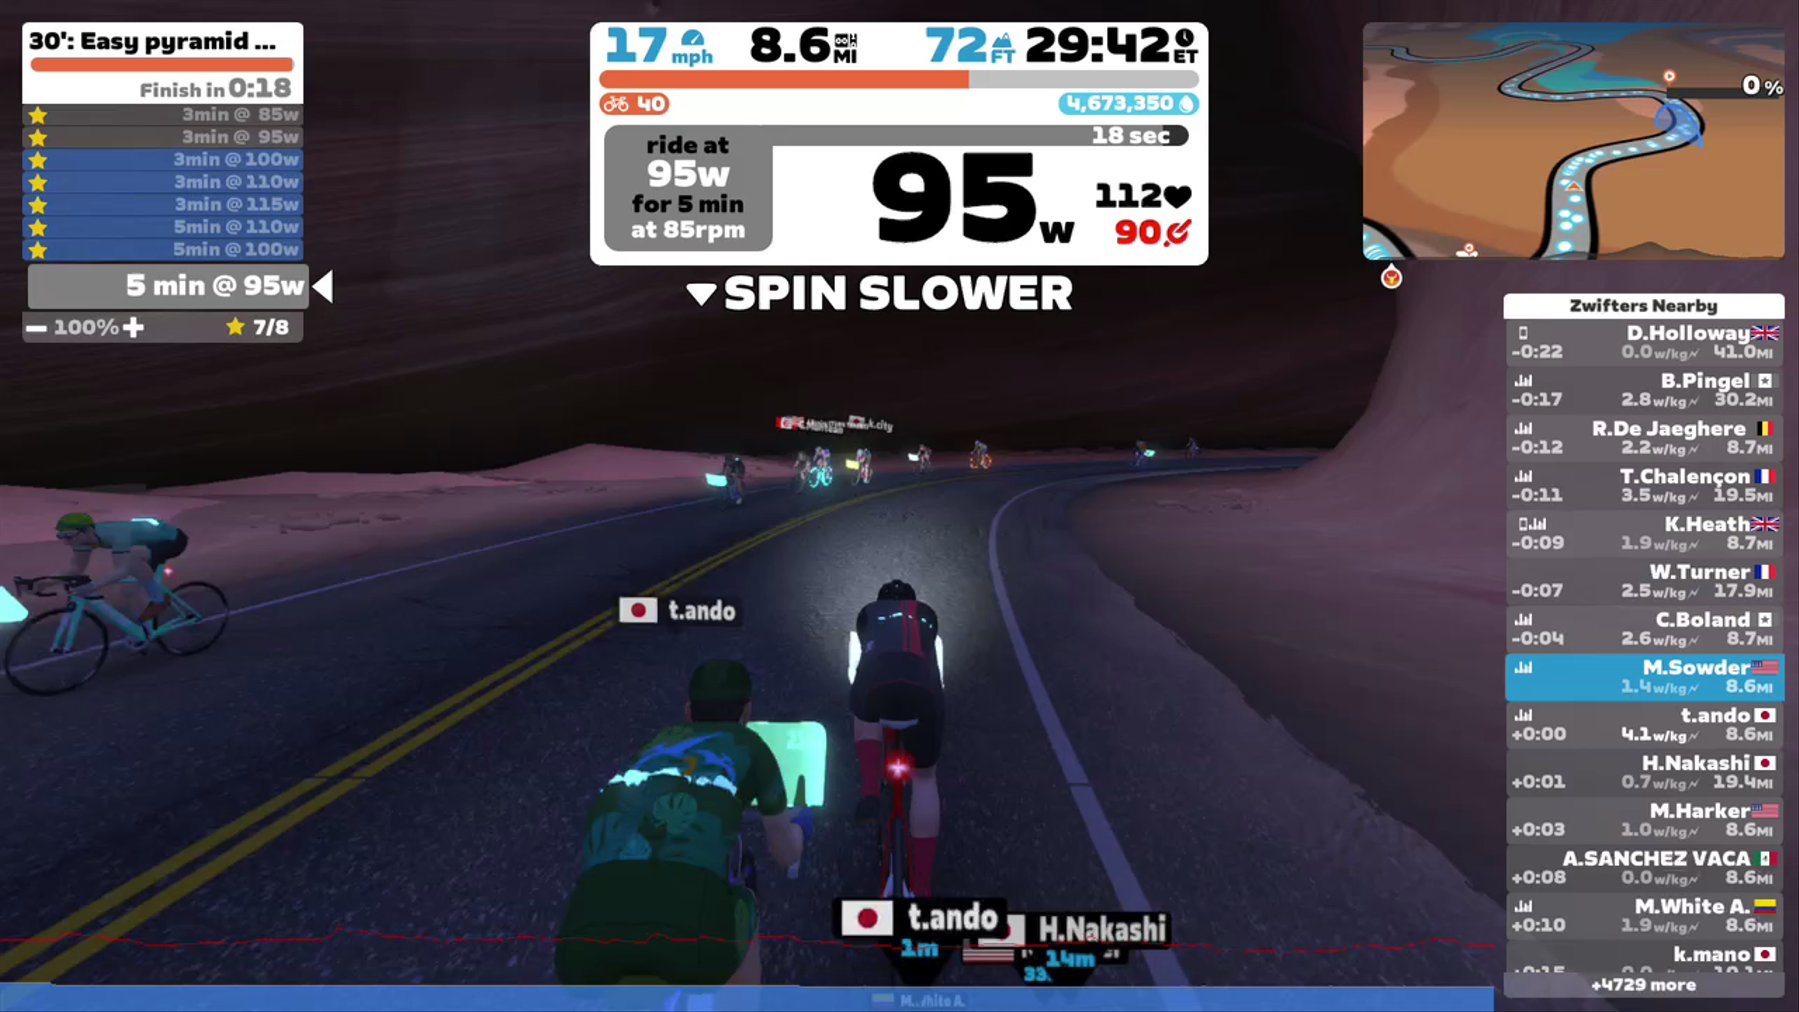 Zwift - 30': Easy pyramid to open legs in Watopia